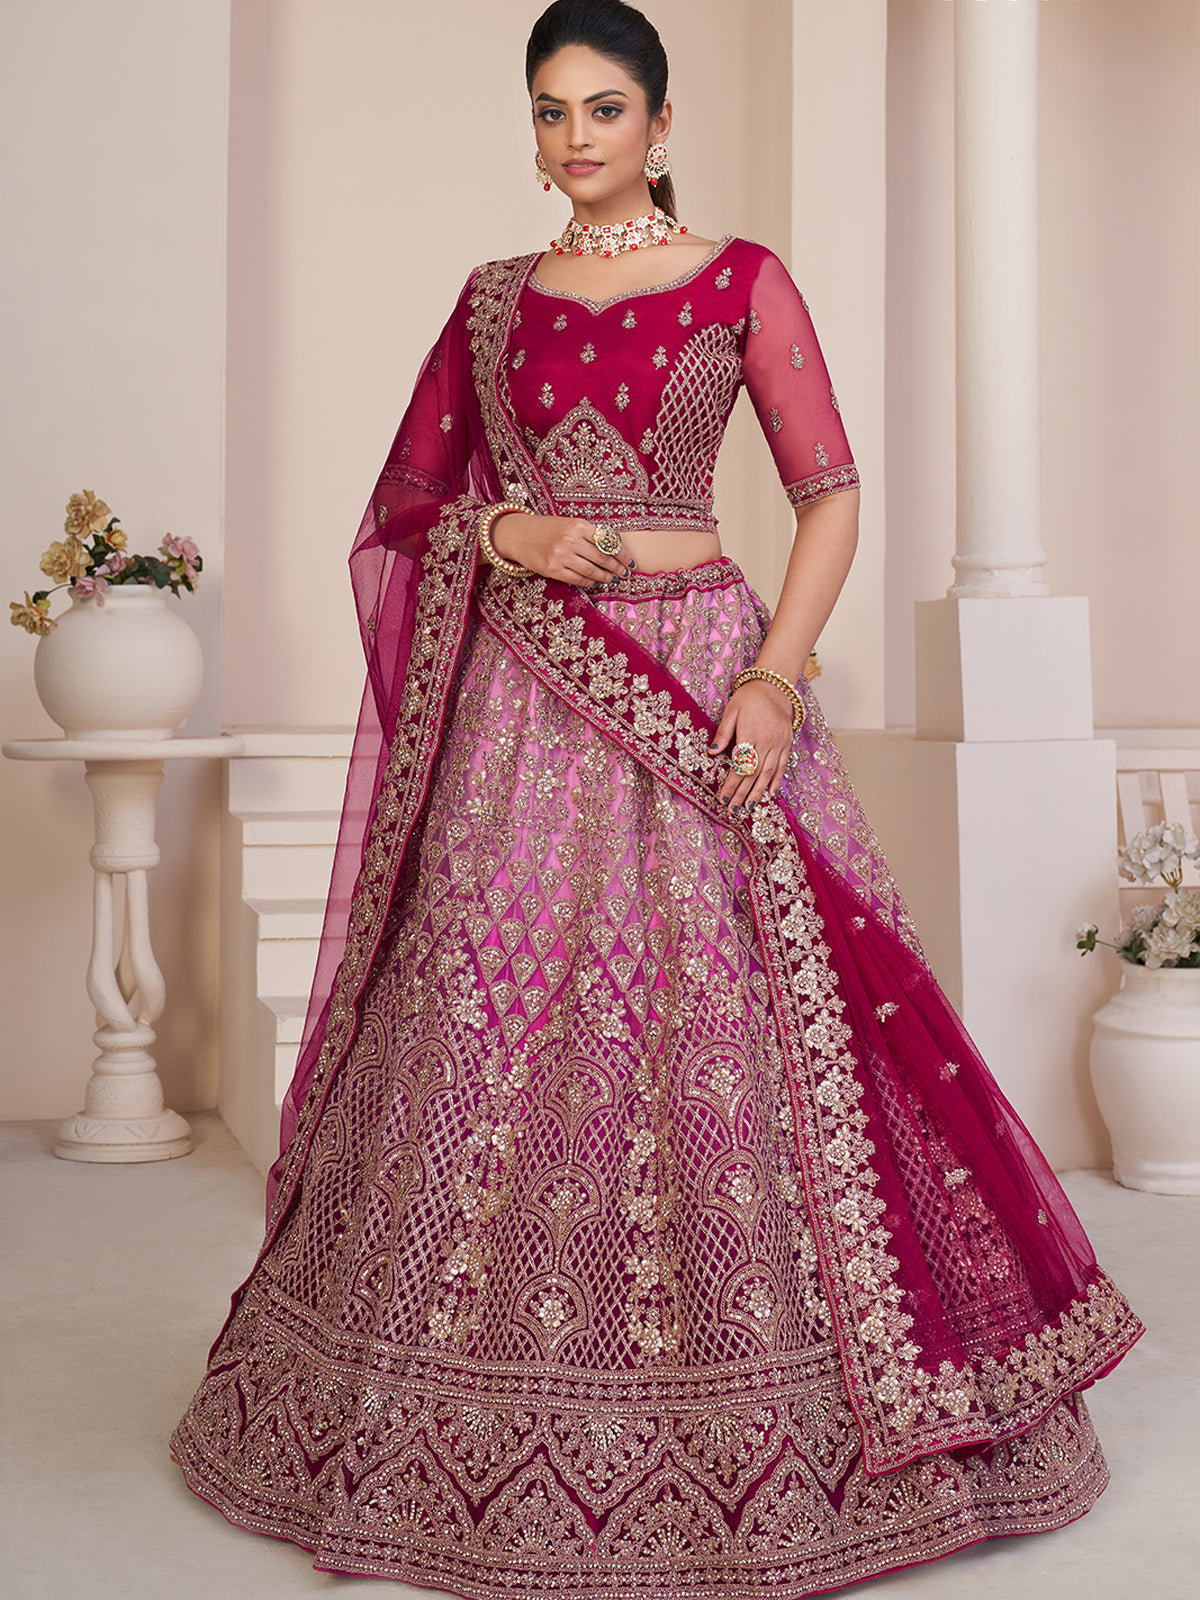 Odette Purple Net Embellished Semi Stitched Lehenga With Unstitched Blouse for Women